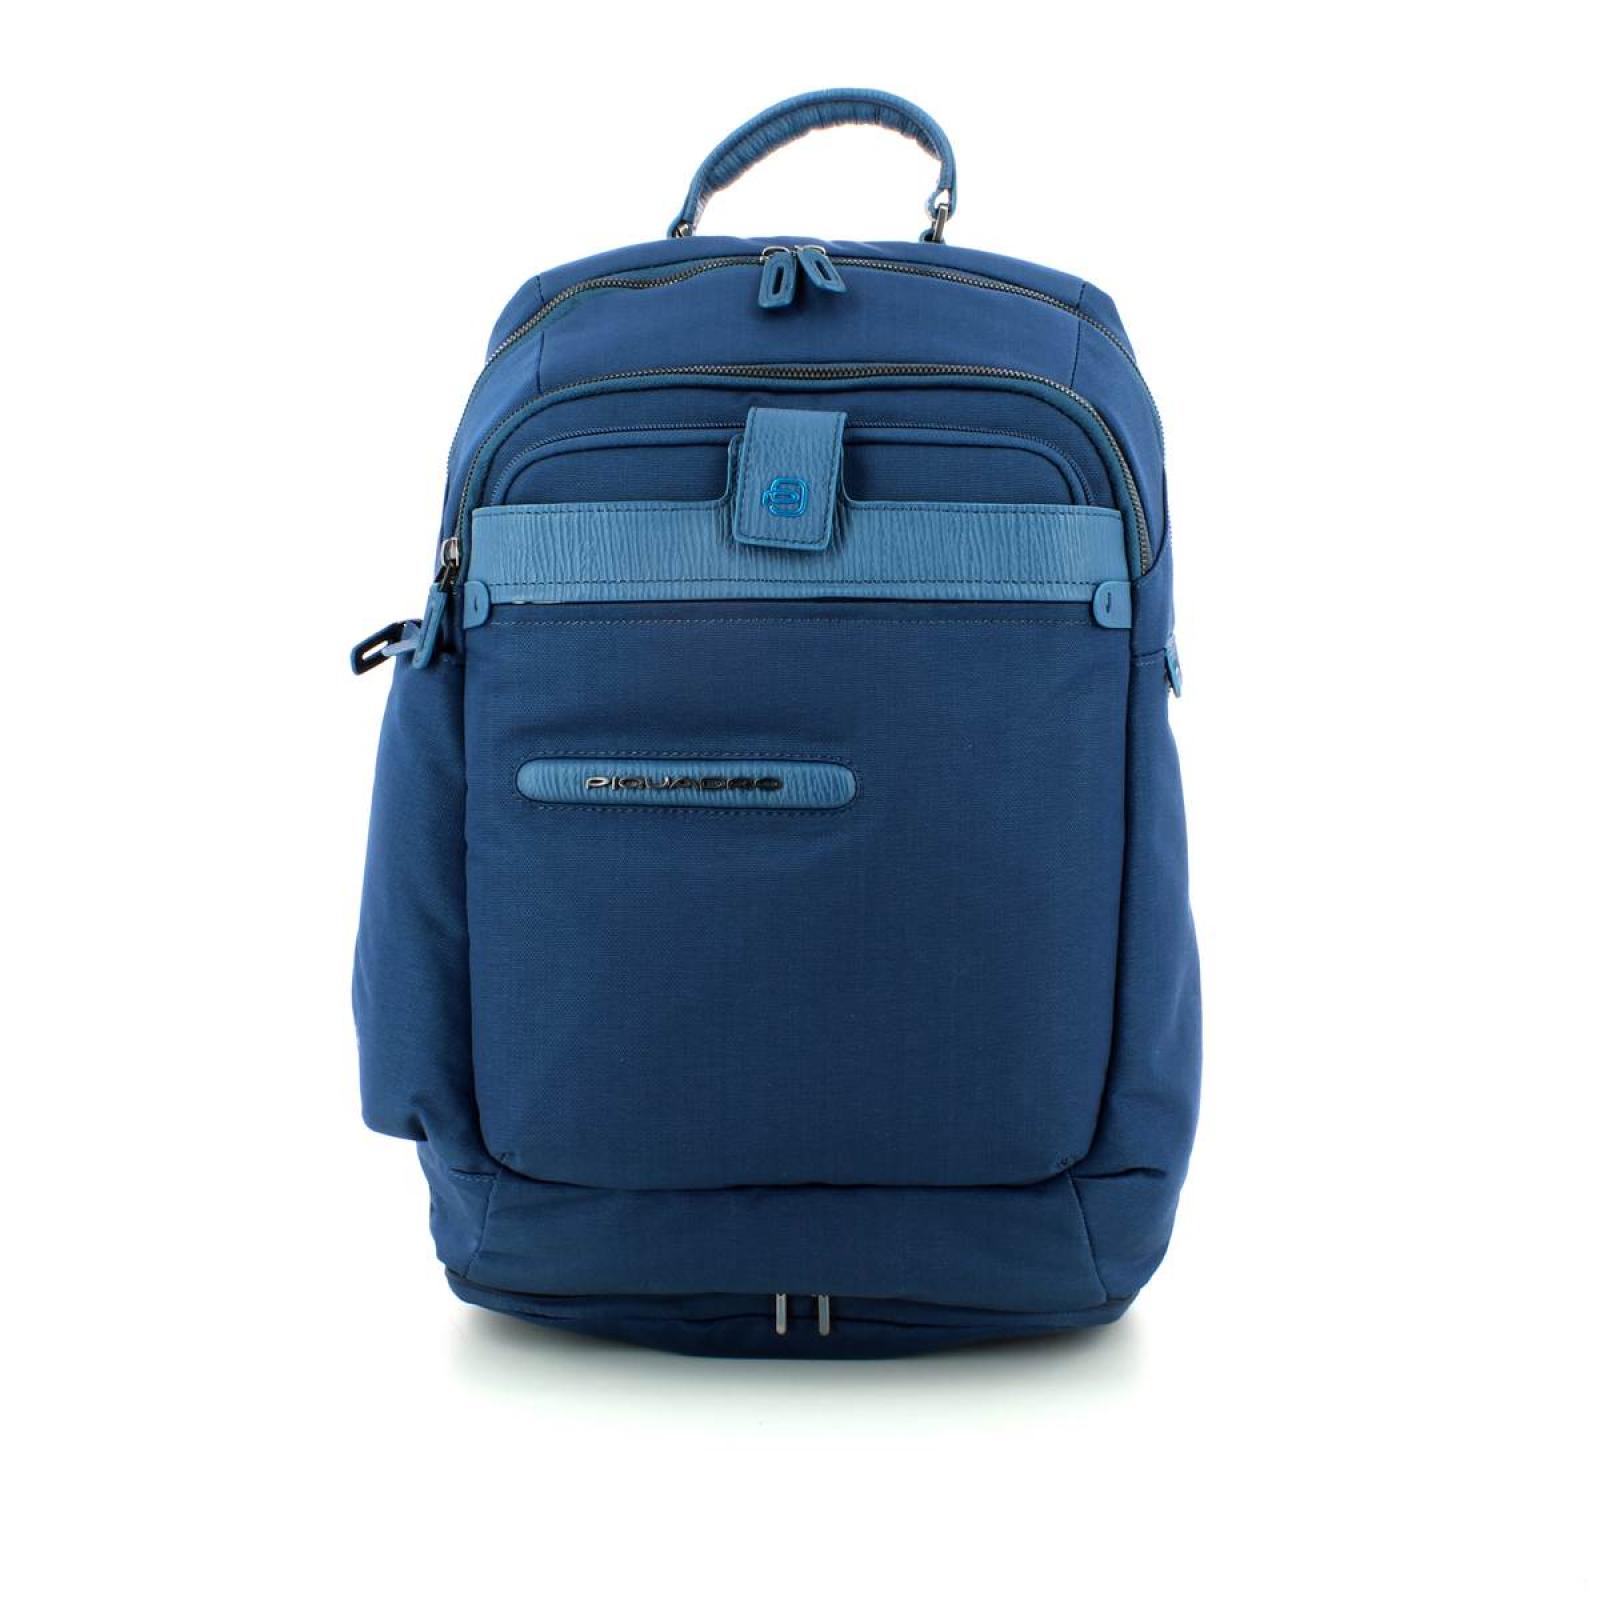 Signo Backpack